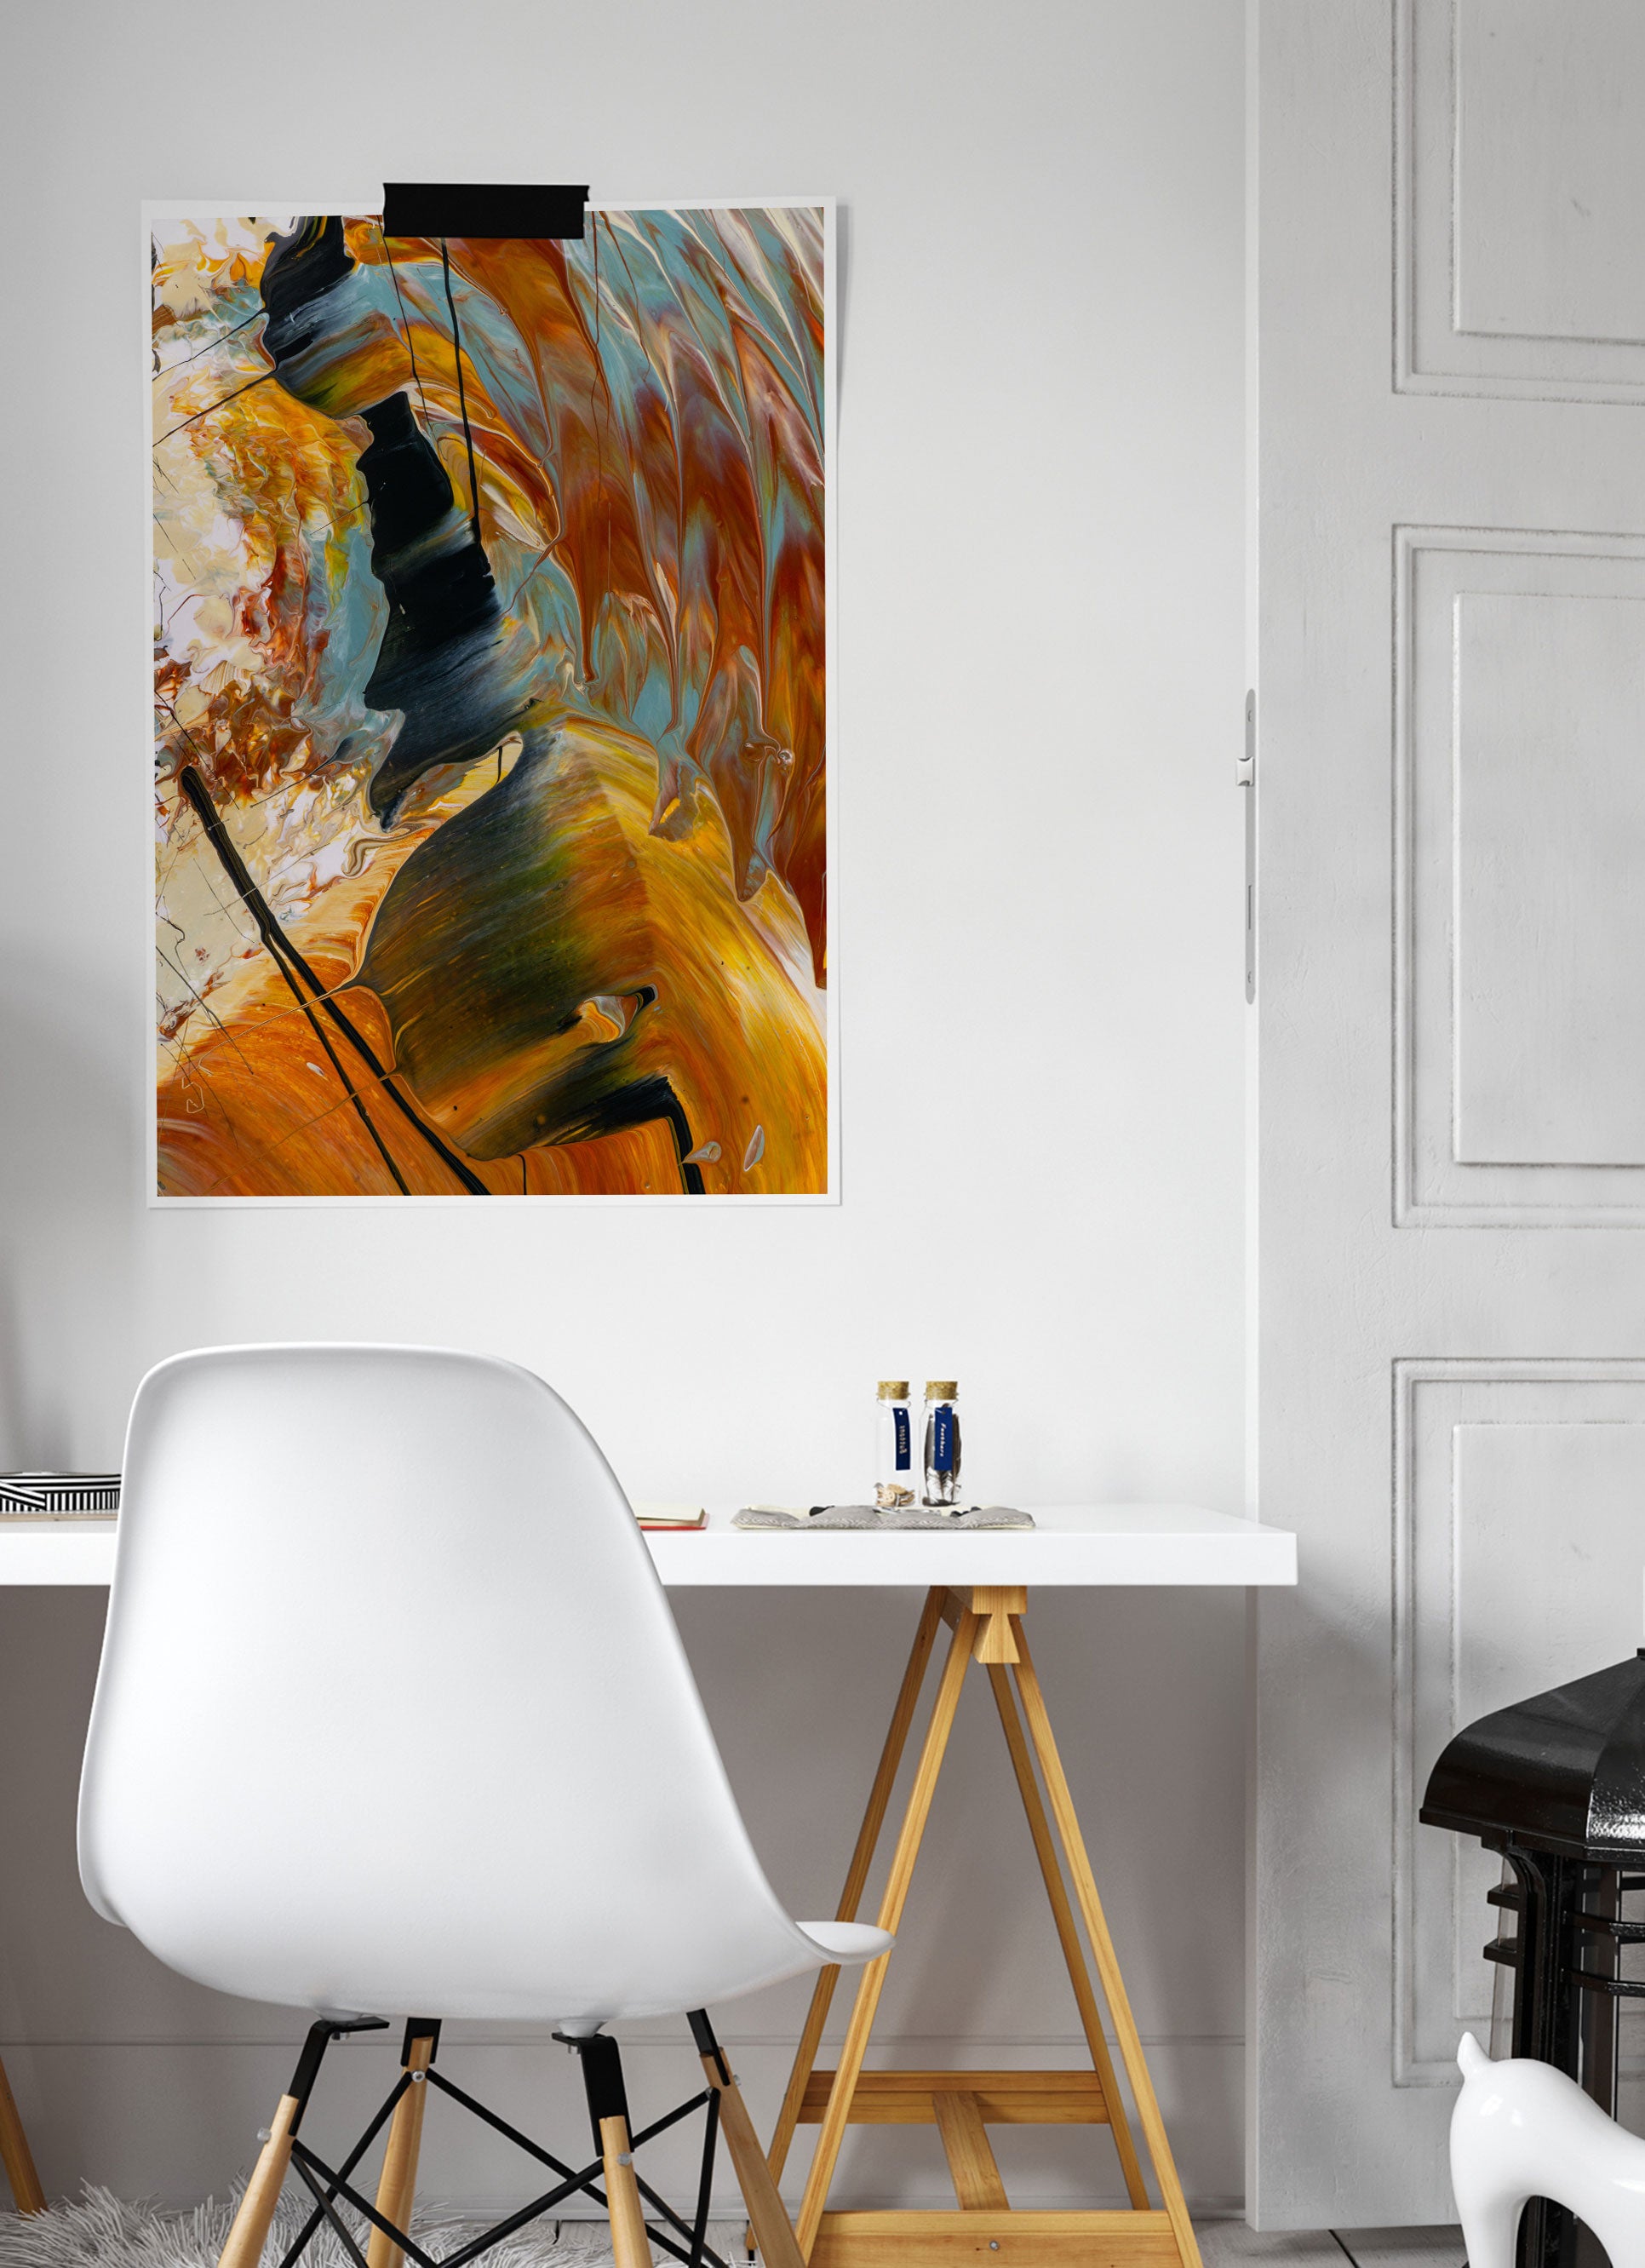 The Play Abstract Art Print on a wall in a modern room setting